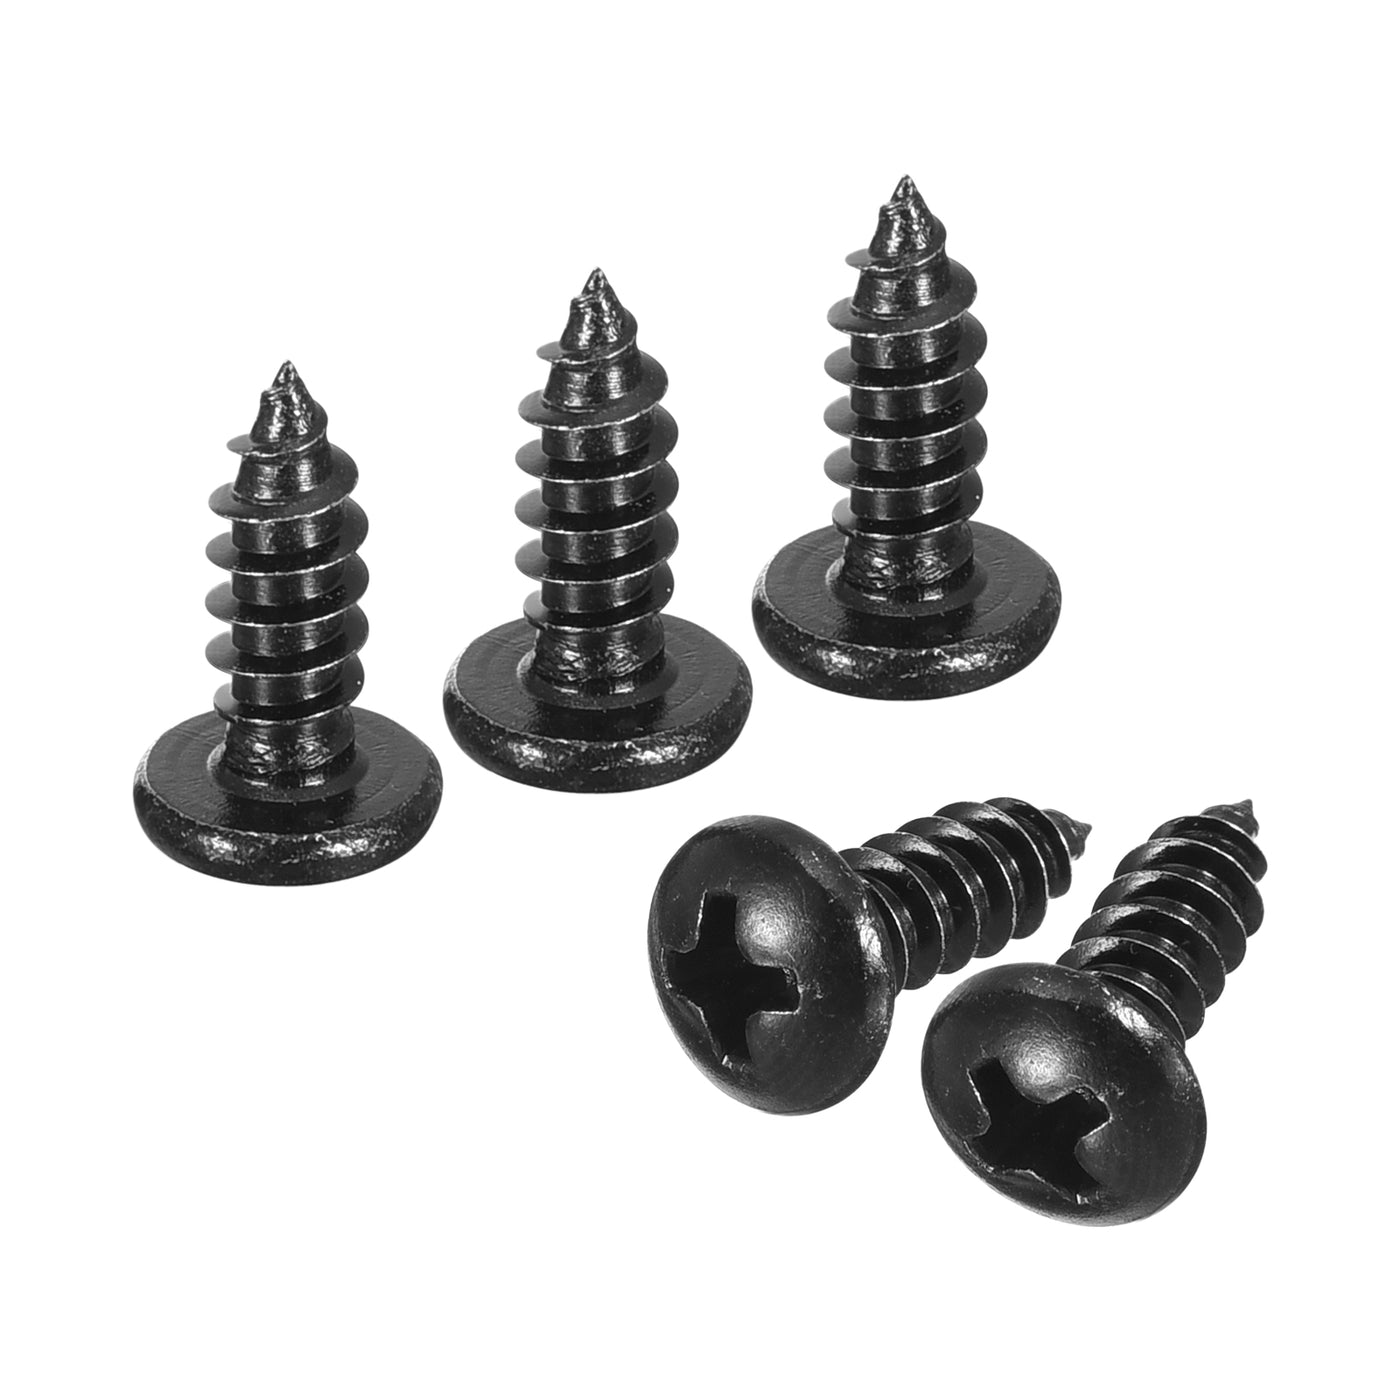 uxcell Uxcell 4mm x 12mm Phillips Pan Head Self-tapping Screw, 100pcs - 304 Stainless Steel Round Head Wood Screw Full Thread (Black)